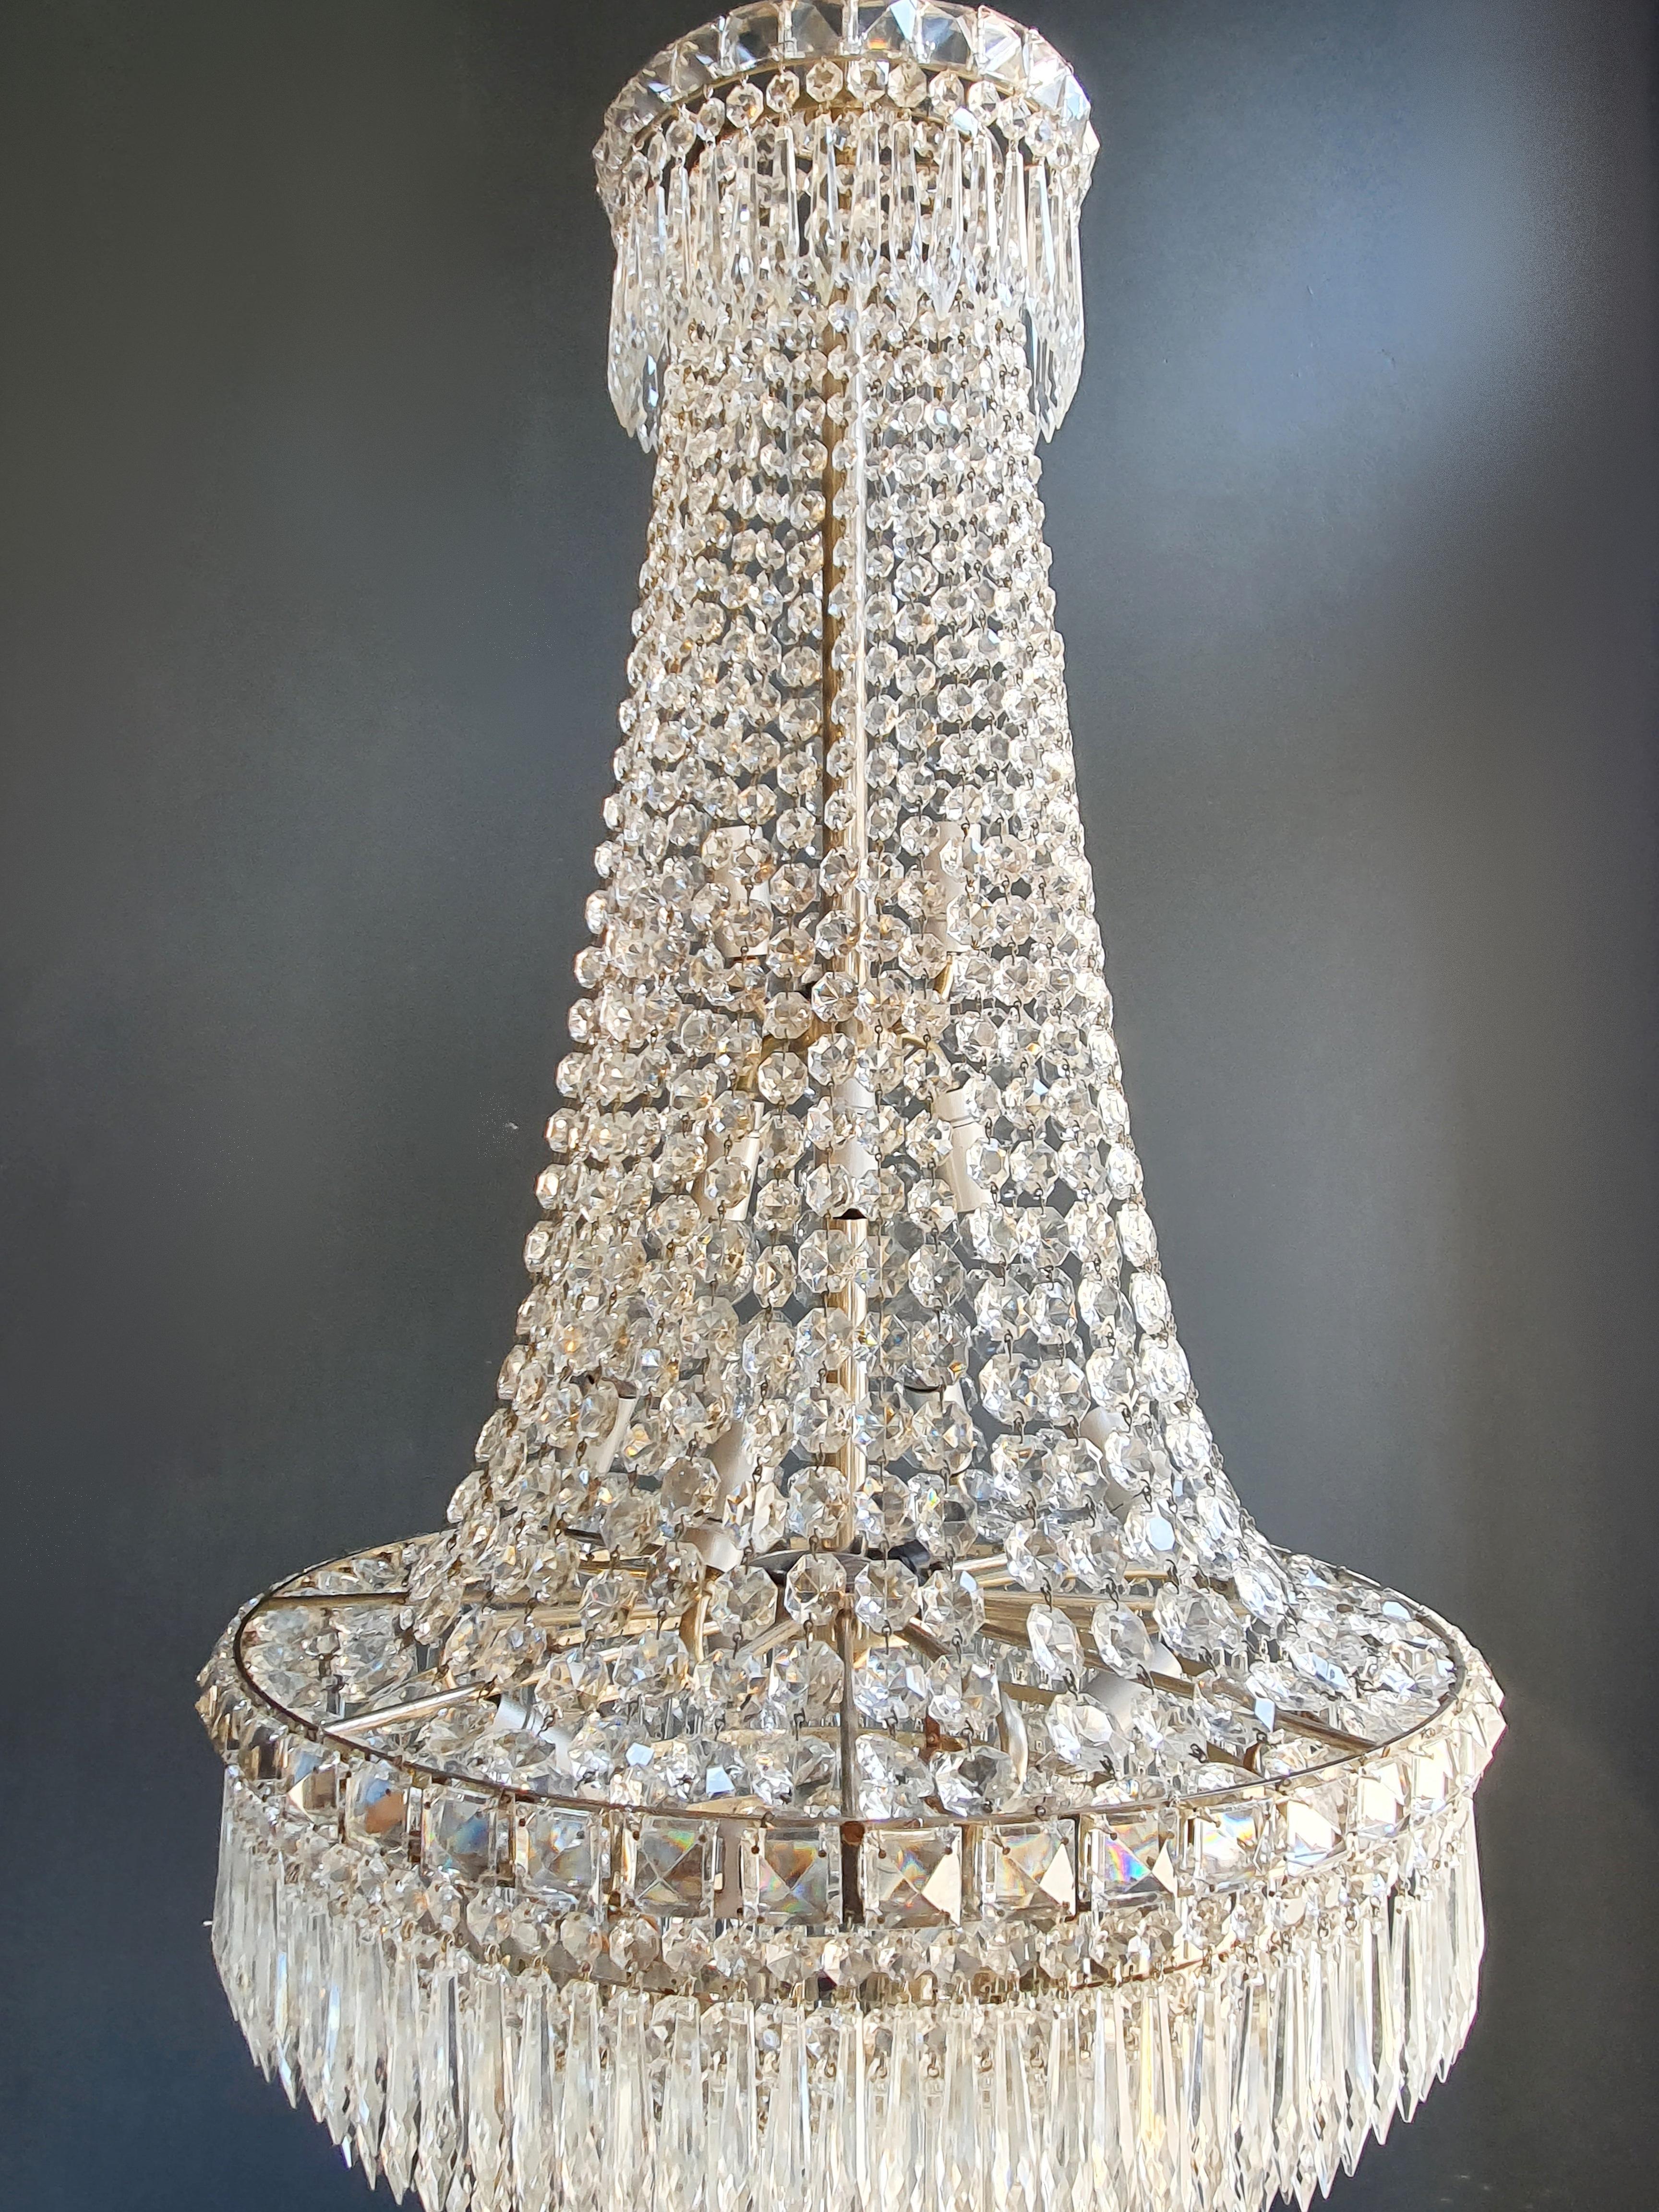 This Italian Empire 14 lights chandelier has a silvered frame. Cut crystal octagonal button chains hang from the top to the bottom of the chandelier all around, where hundreds of icicle cut crystal pendants fall down in a waterfall.

Original